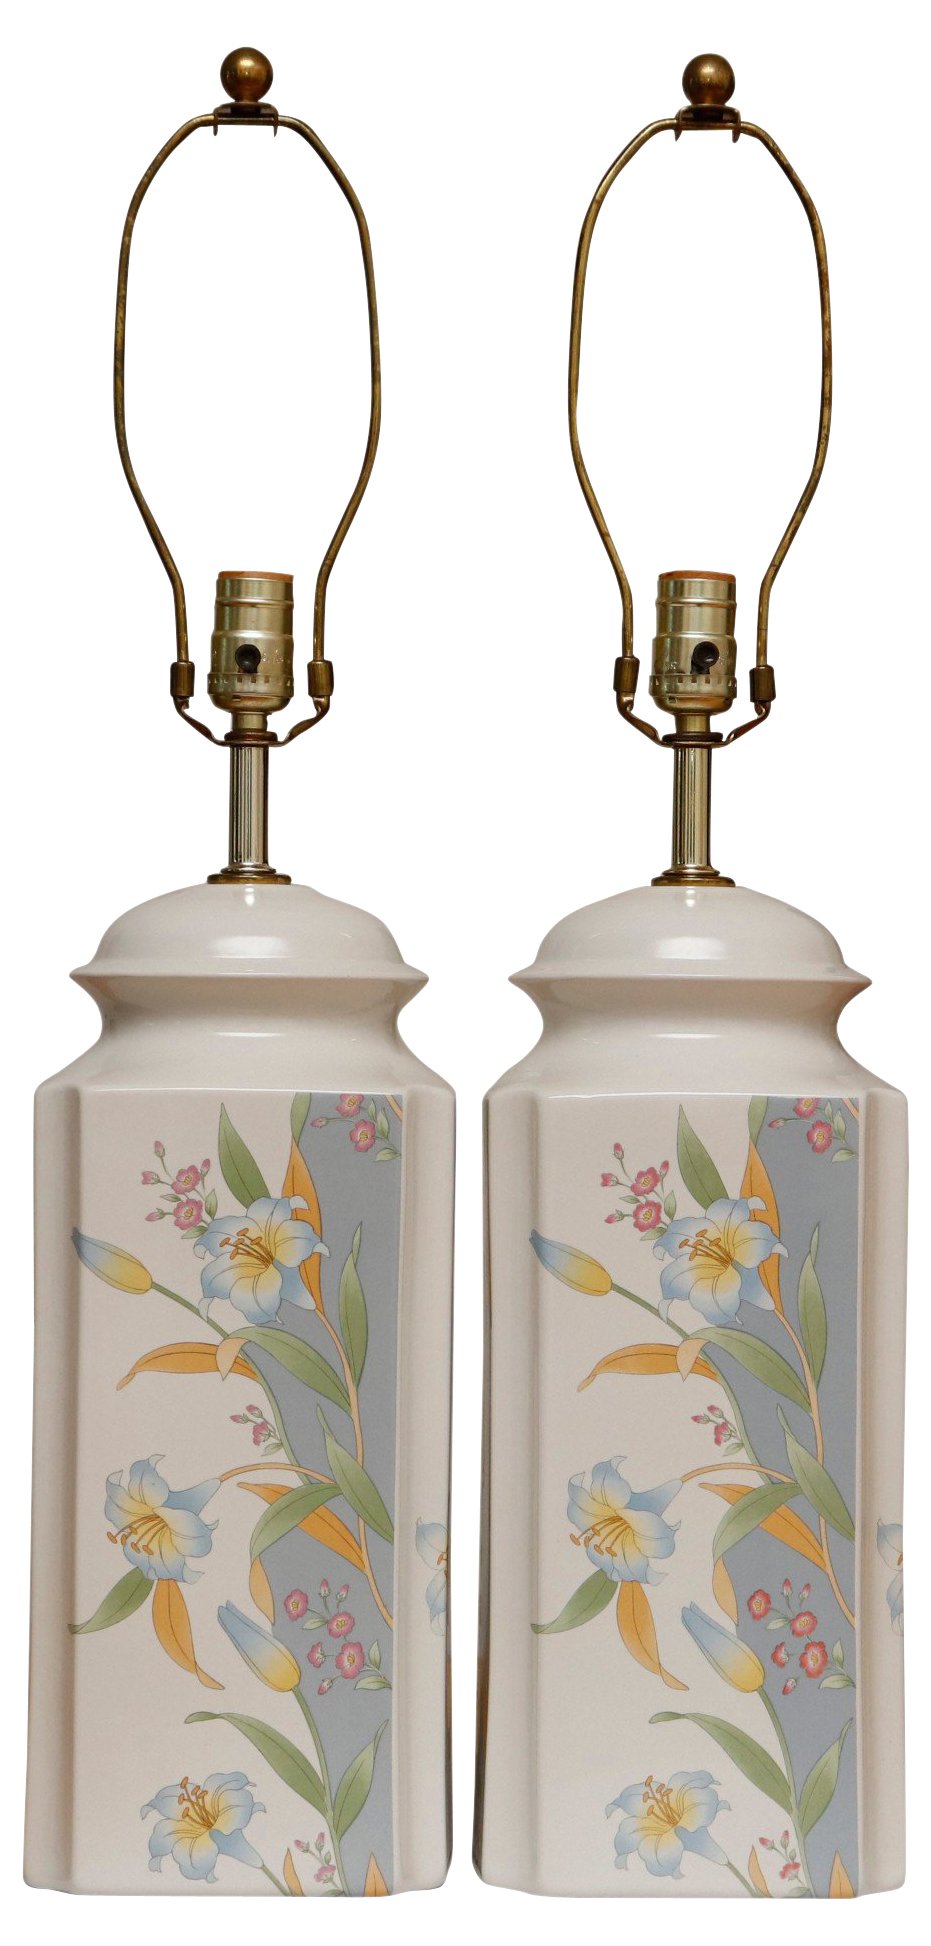 Murray Feiss Ceramic Table Lamps, a Pair~P77556479